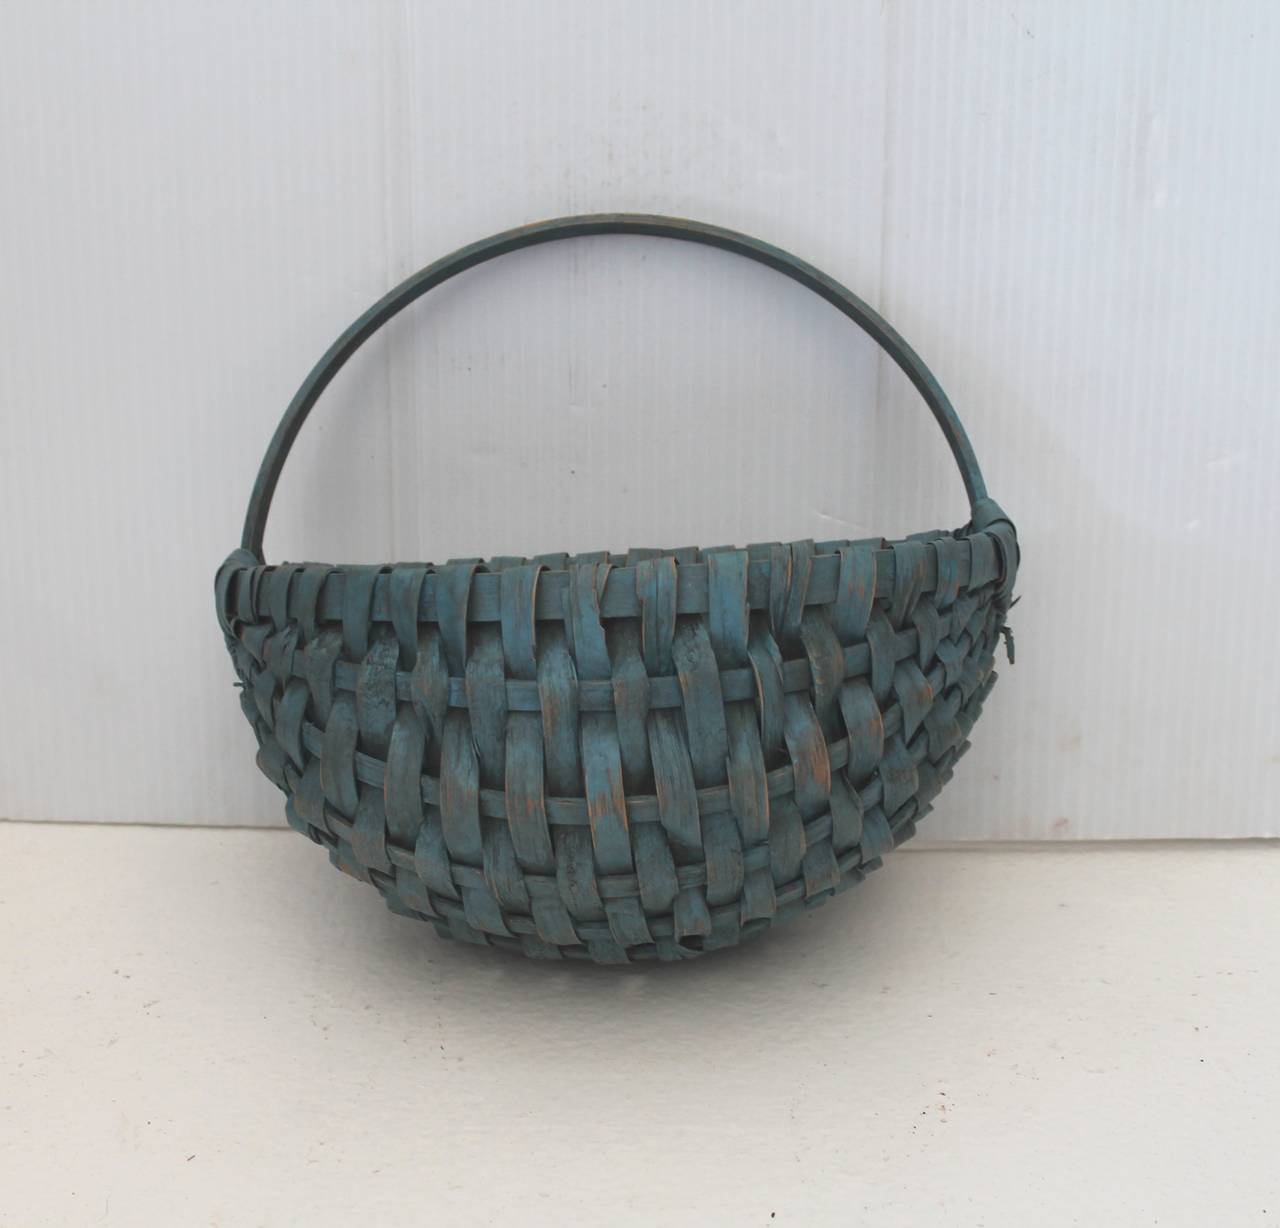 19th century wall or half basket was found in New England and has a great worn yet wonderful surface. This early basket was probably tucked away for years. Condition is very good with minor tiny breaks consistent from age and use. Was found